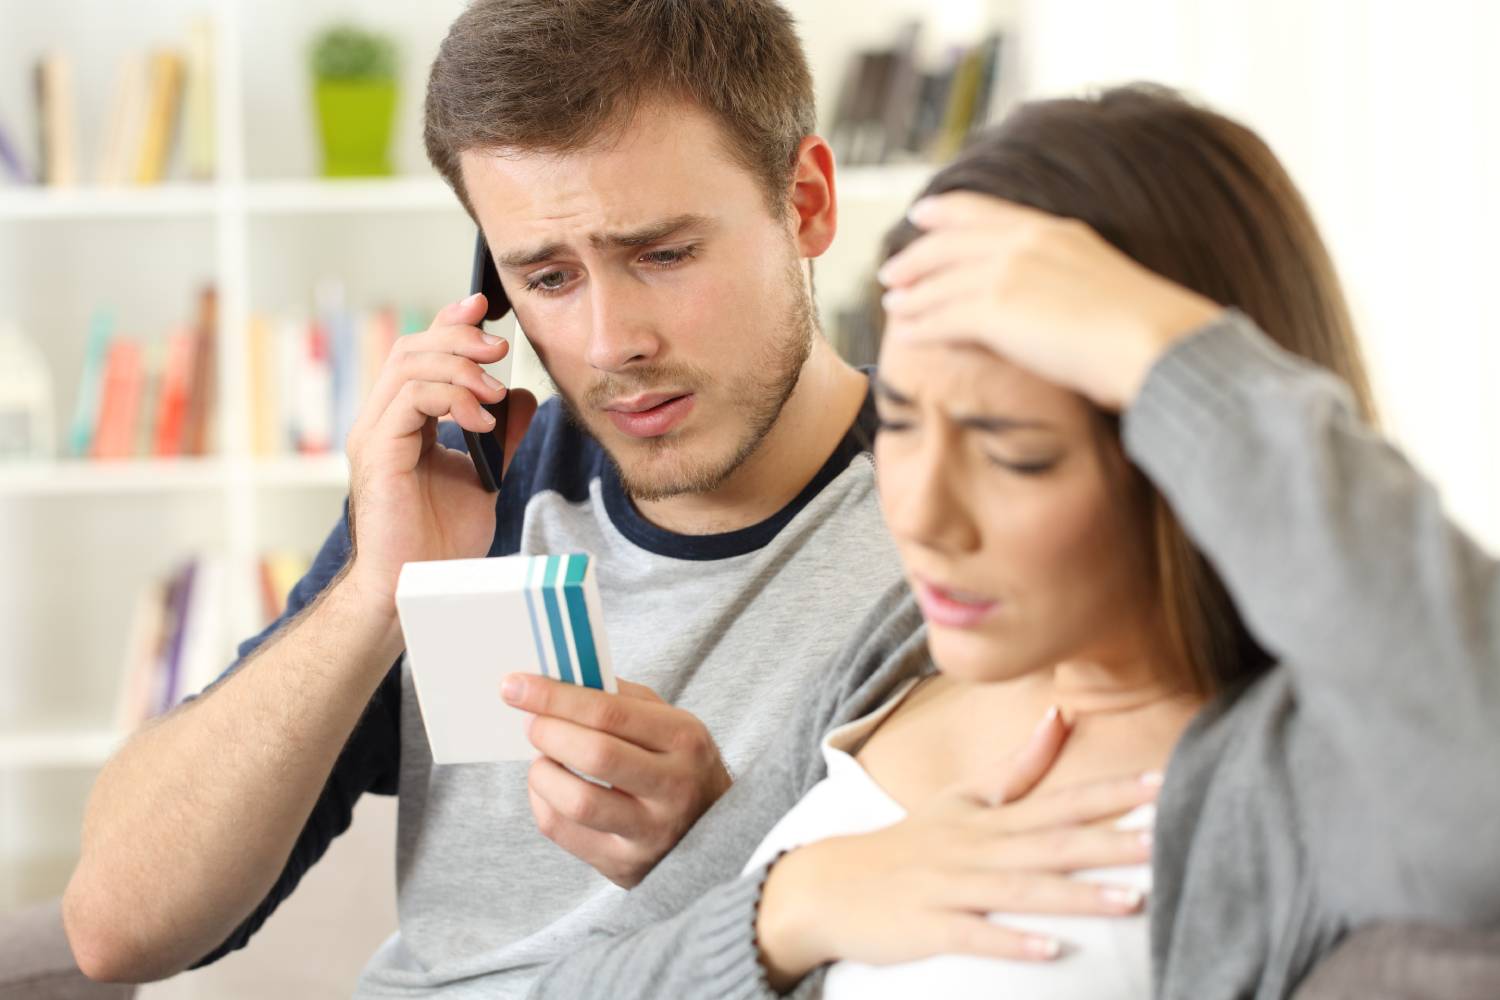 Husband calling doctor asking about wife medicine allergy or side effects